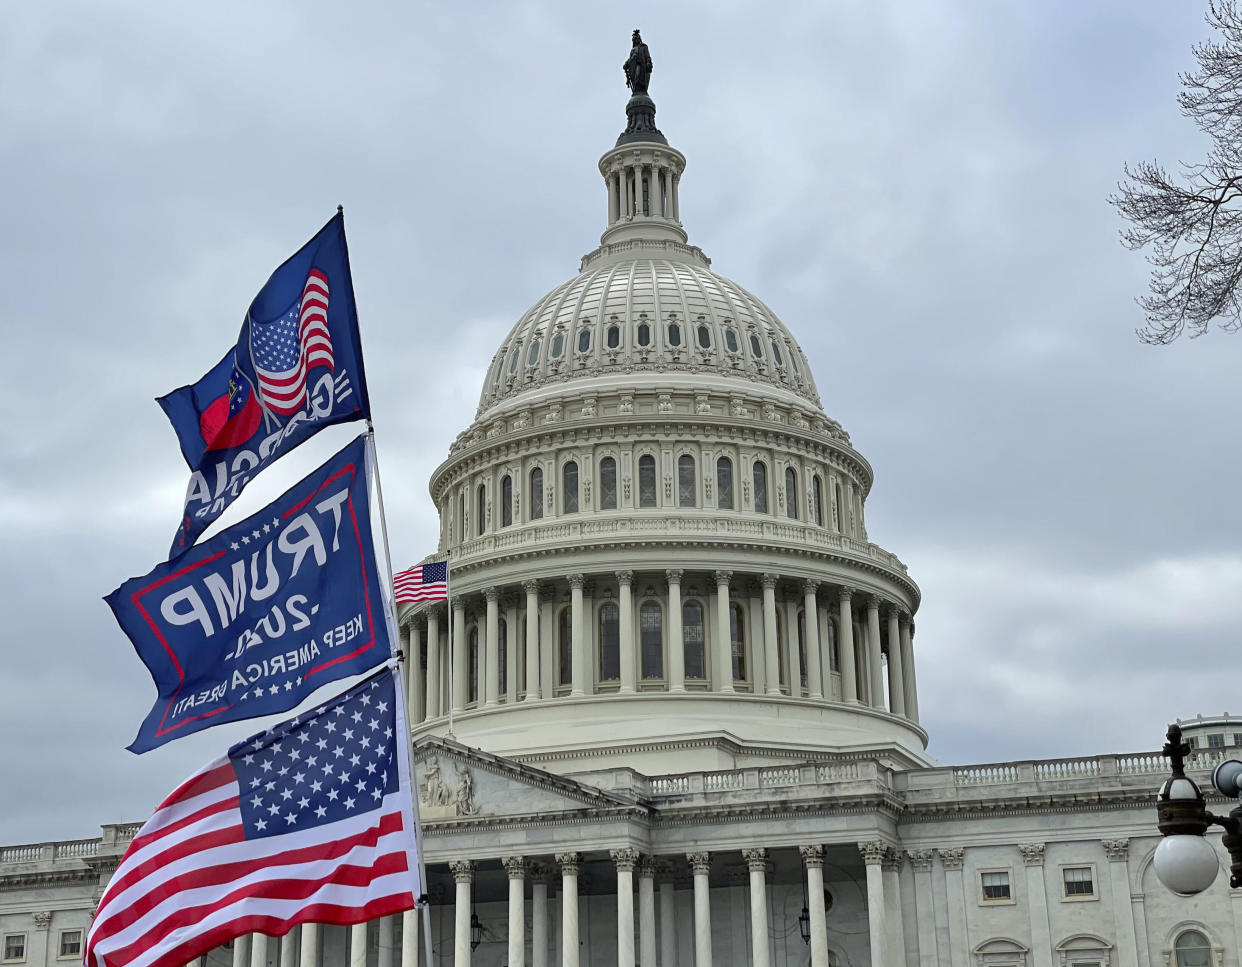 Only 7% of Republicans now say the actions of Donald Trump supporters who invaded the Capitol last week were mostly right, down from 22% who said the same in an earlier HuffPost/YouGov poll. (Photo: zz/STRF/STAR MAX/IPx)